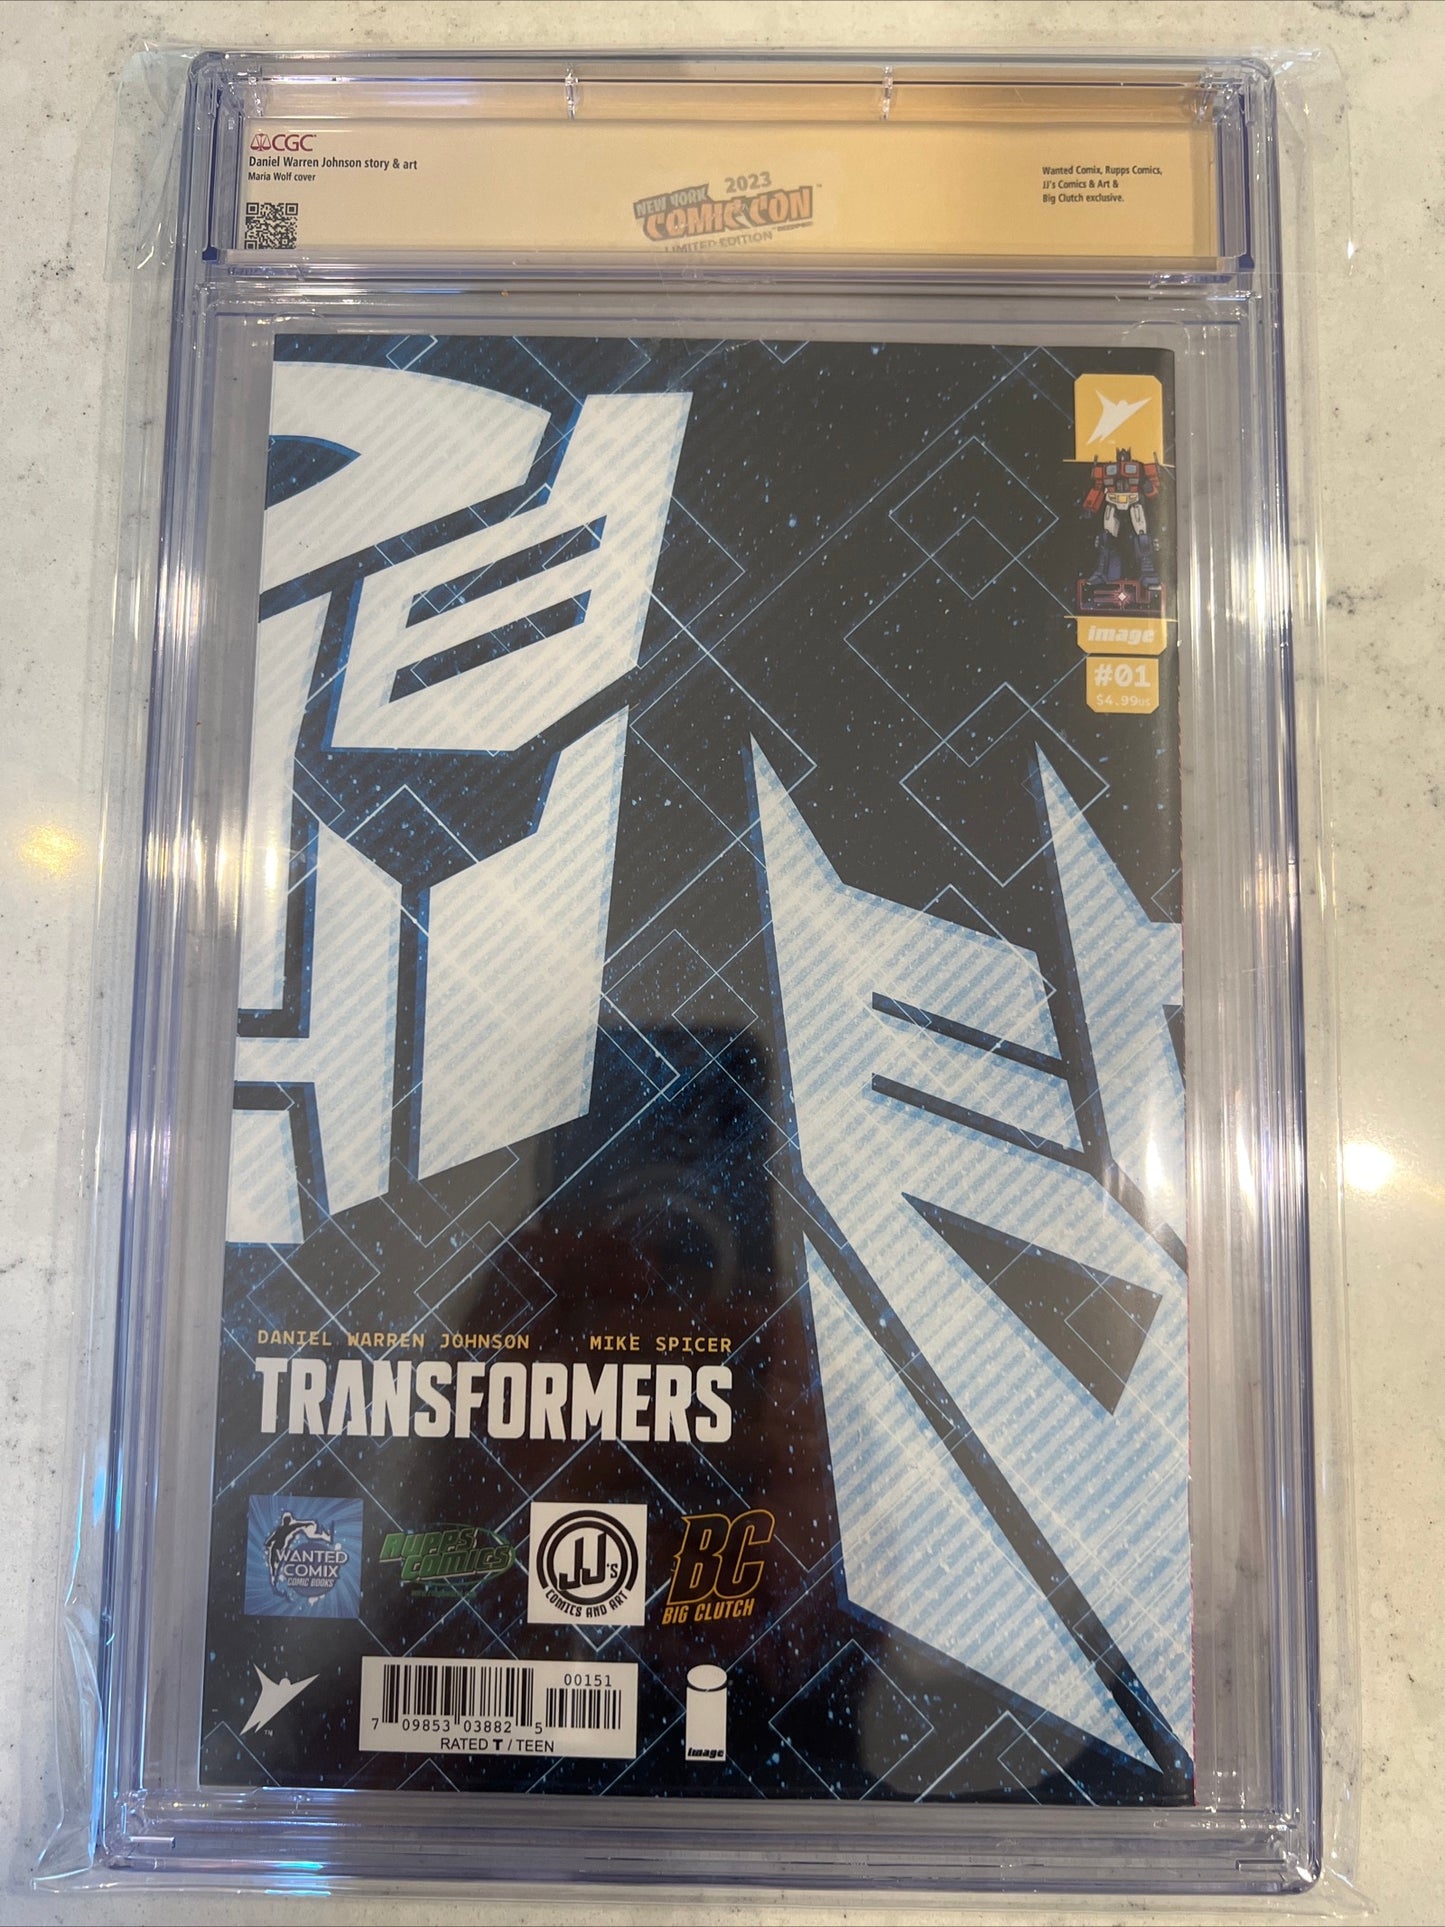 Transformers #1 (Image/Skybound) CGC SS 9.8 (Maria Wolf Virgin Cover) signed by Daniel Warren Johnson and Maria Wolf